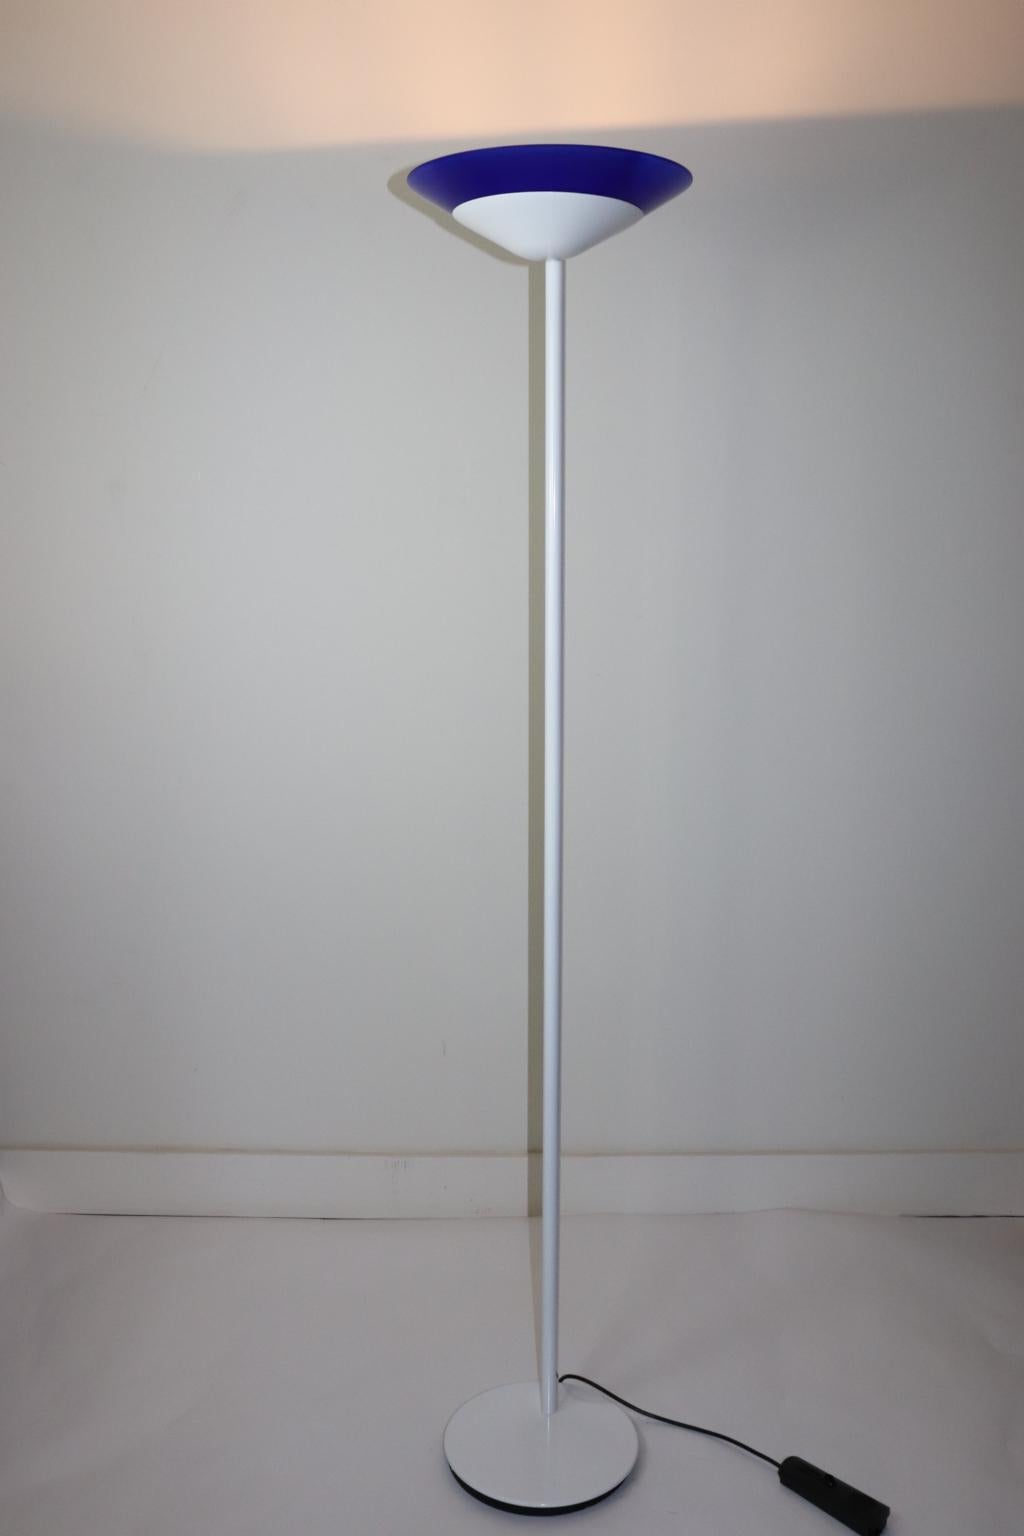 Italian floor lamp, white lacquered metal stem and Murano glass blue diffuser. The 